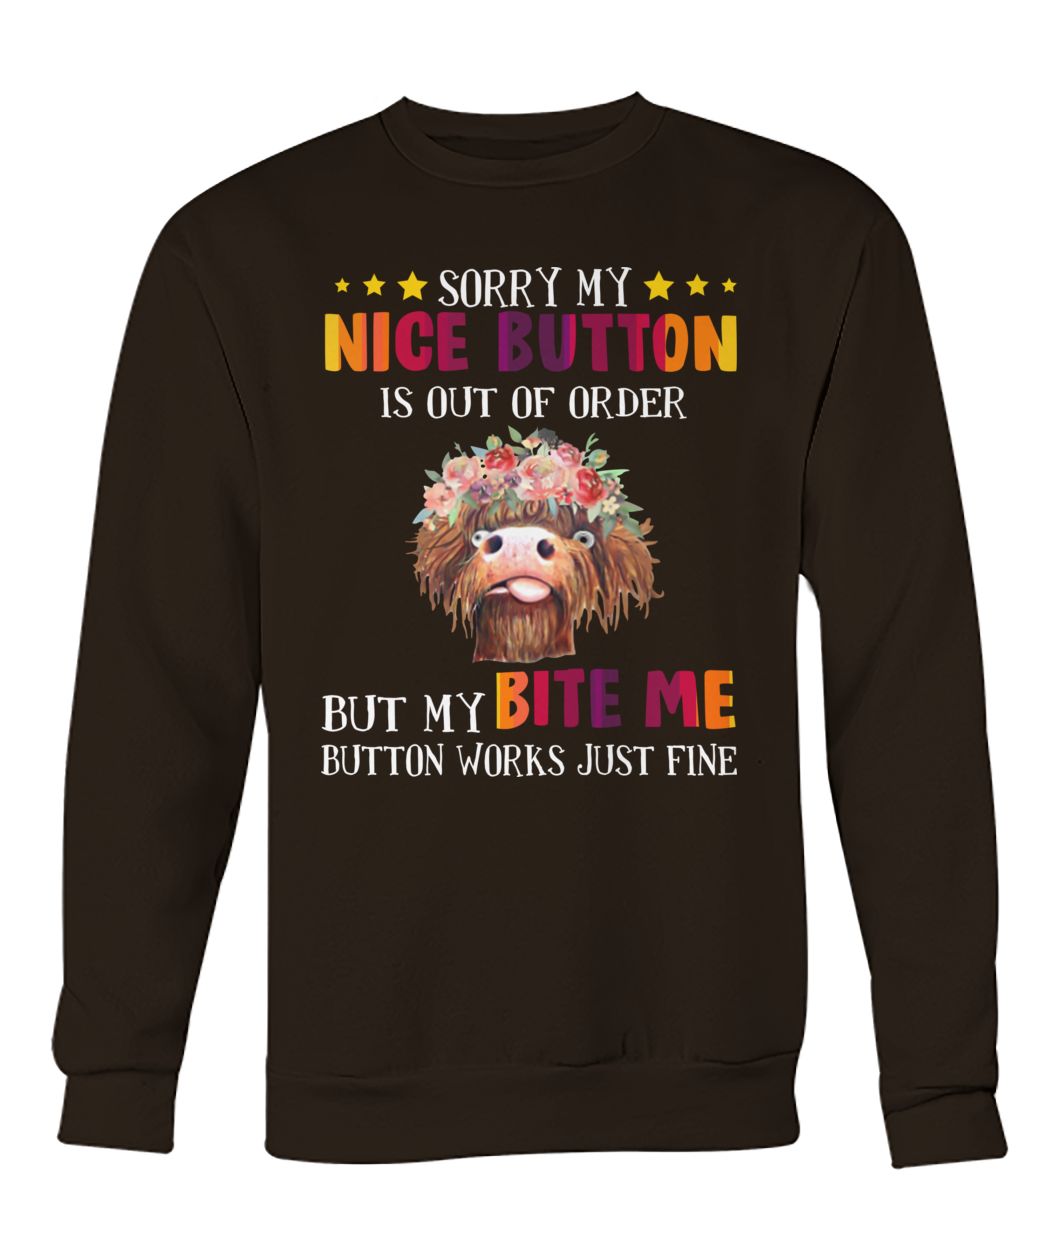 Sloth sorry my nice button is out of order but my bite me button works just fine crew neck sweatshirt